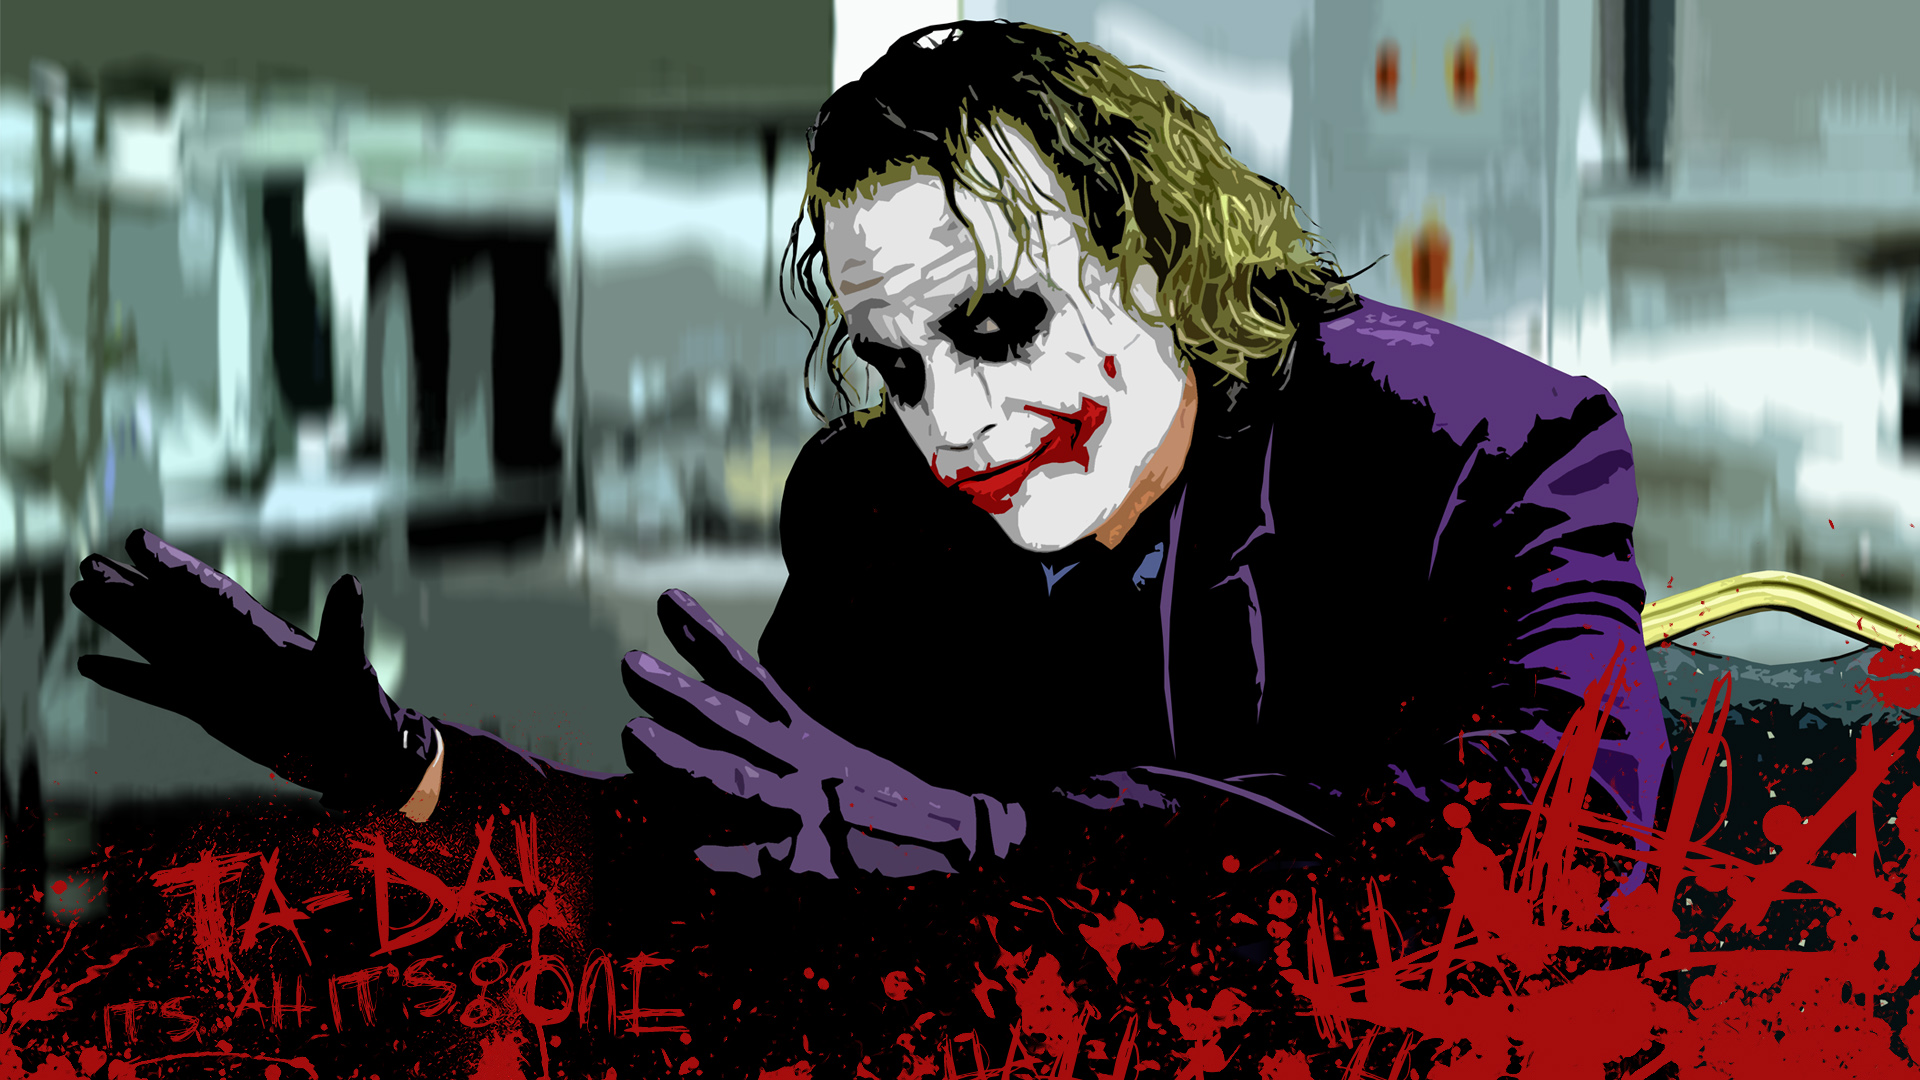 Joker Hd Wallpapers For Mobile Free Download